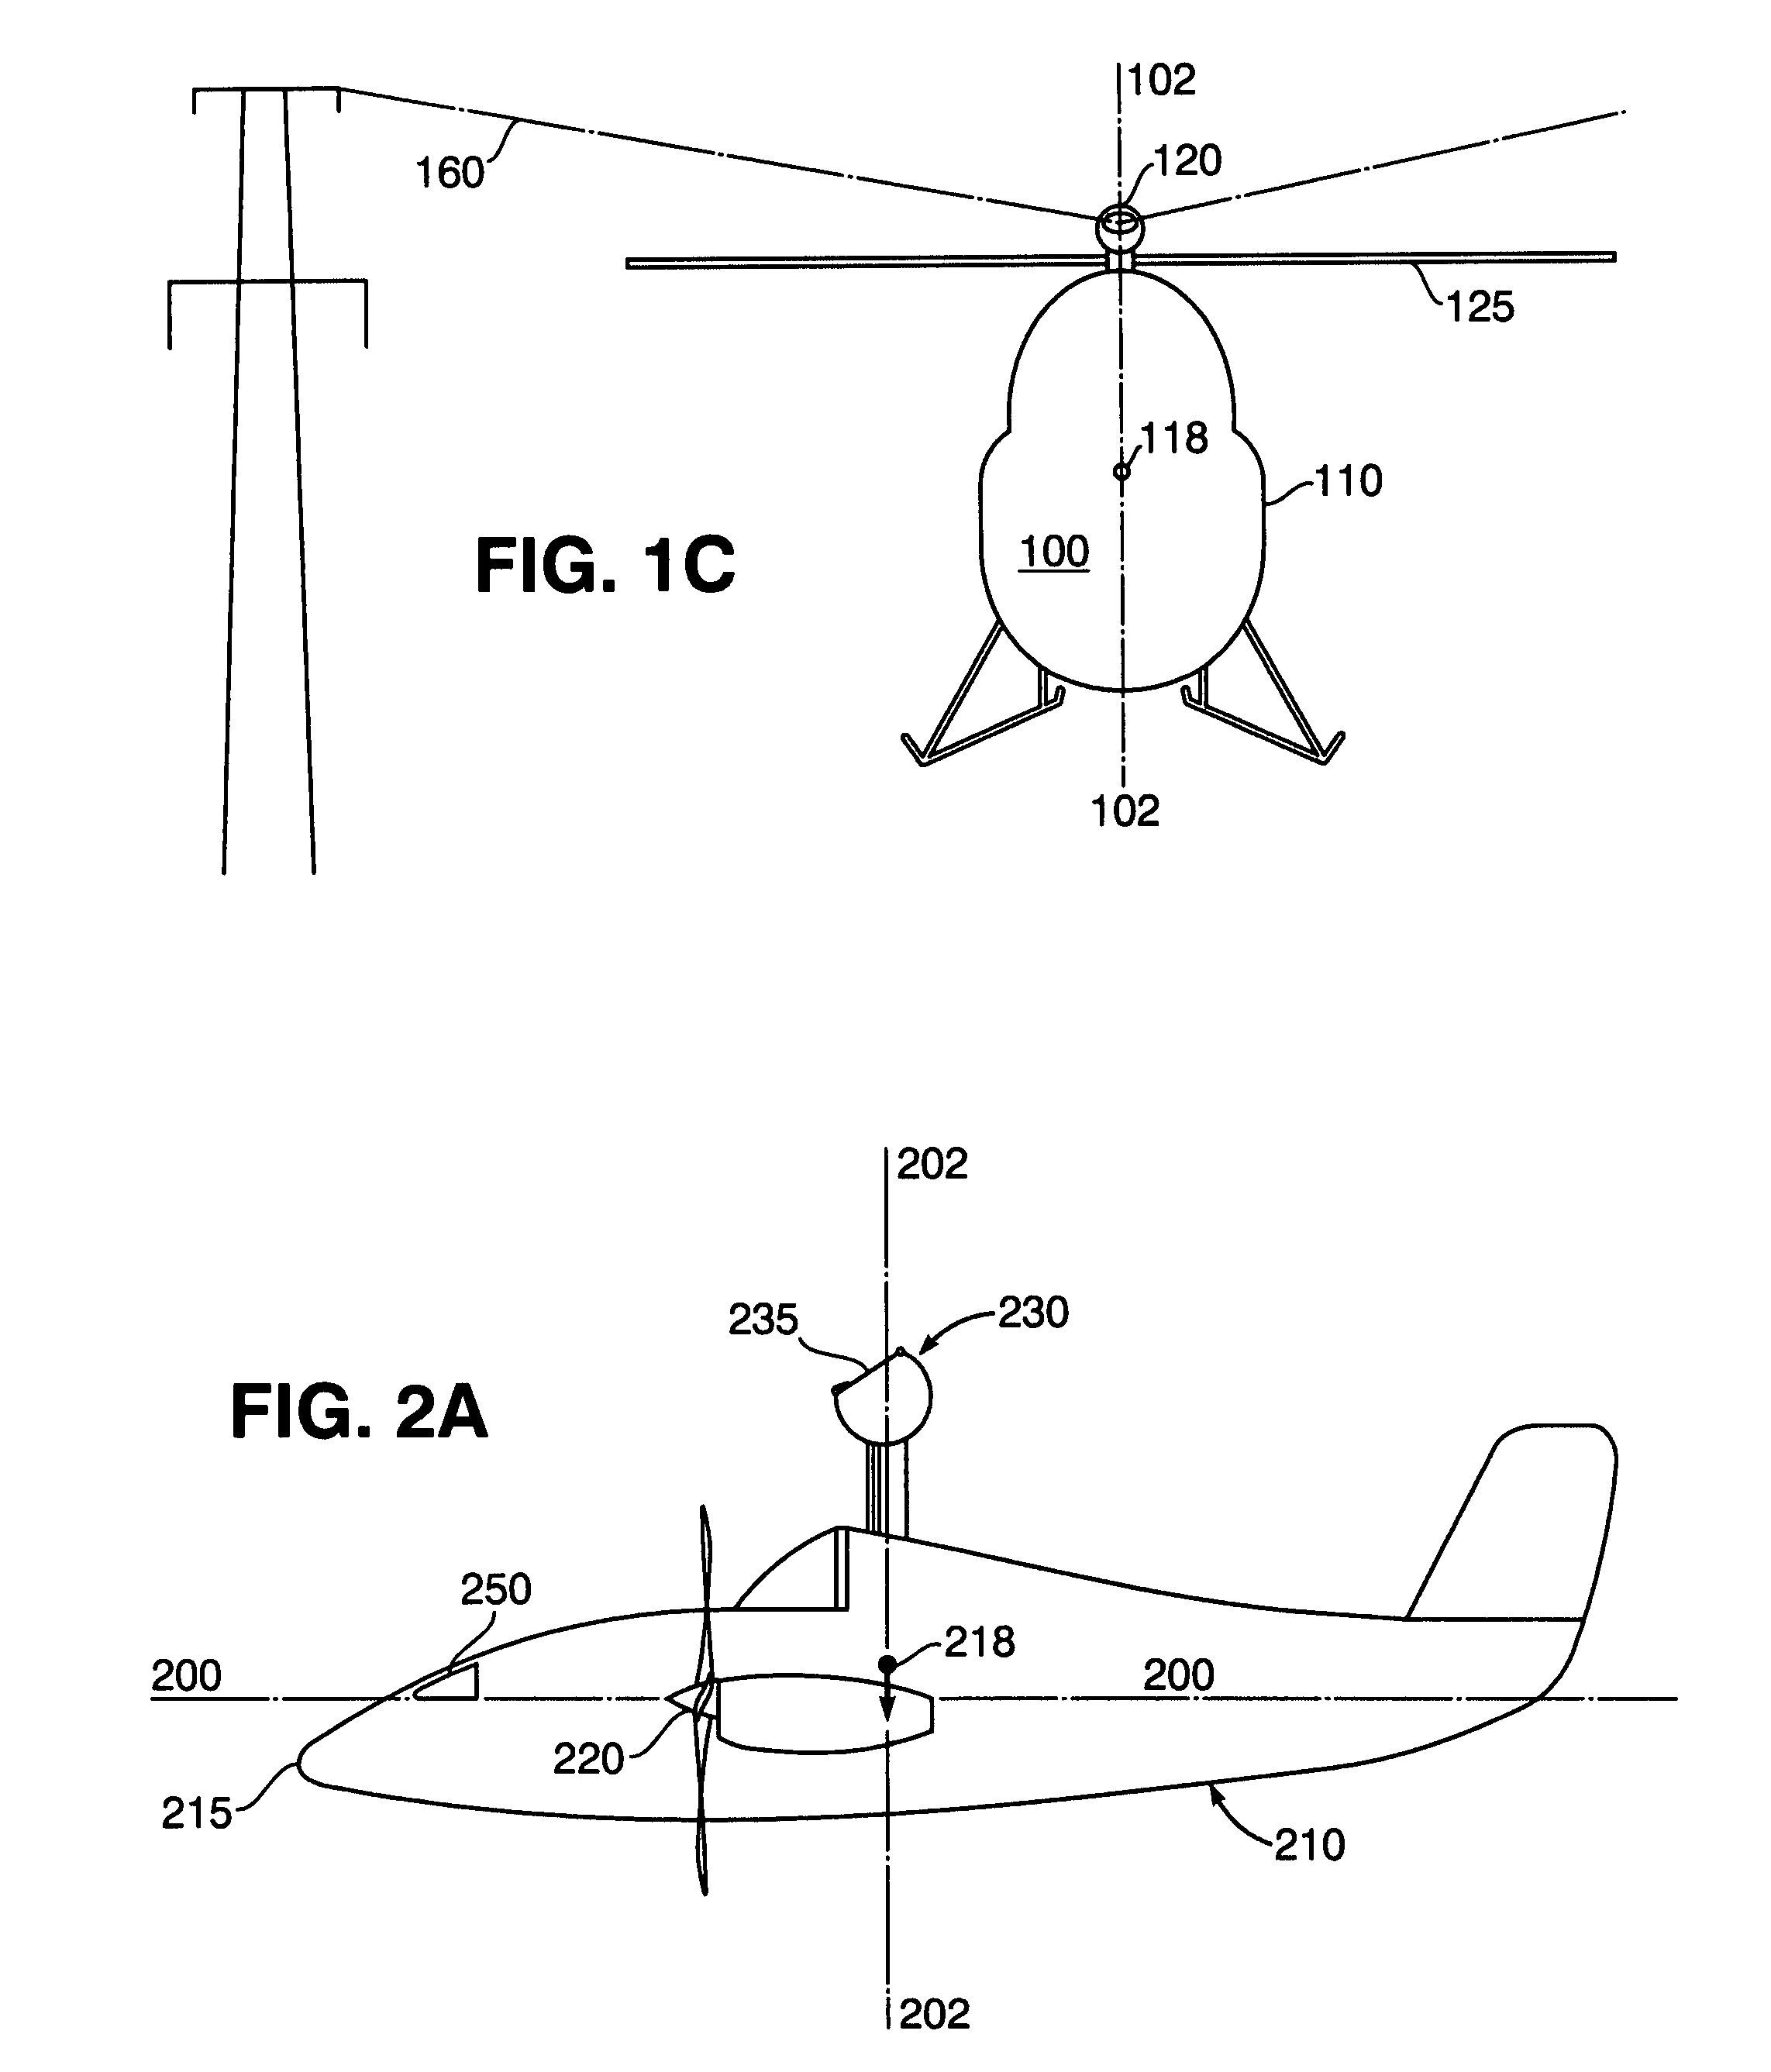 Battery charging arrangement for unmanned aerial vehicle utilizing the electromagnetic field associated with utility power lines to generate power to inductively charge energy supplies